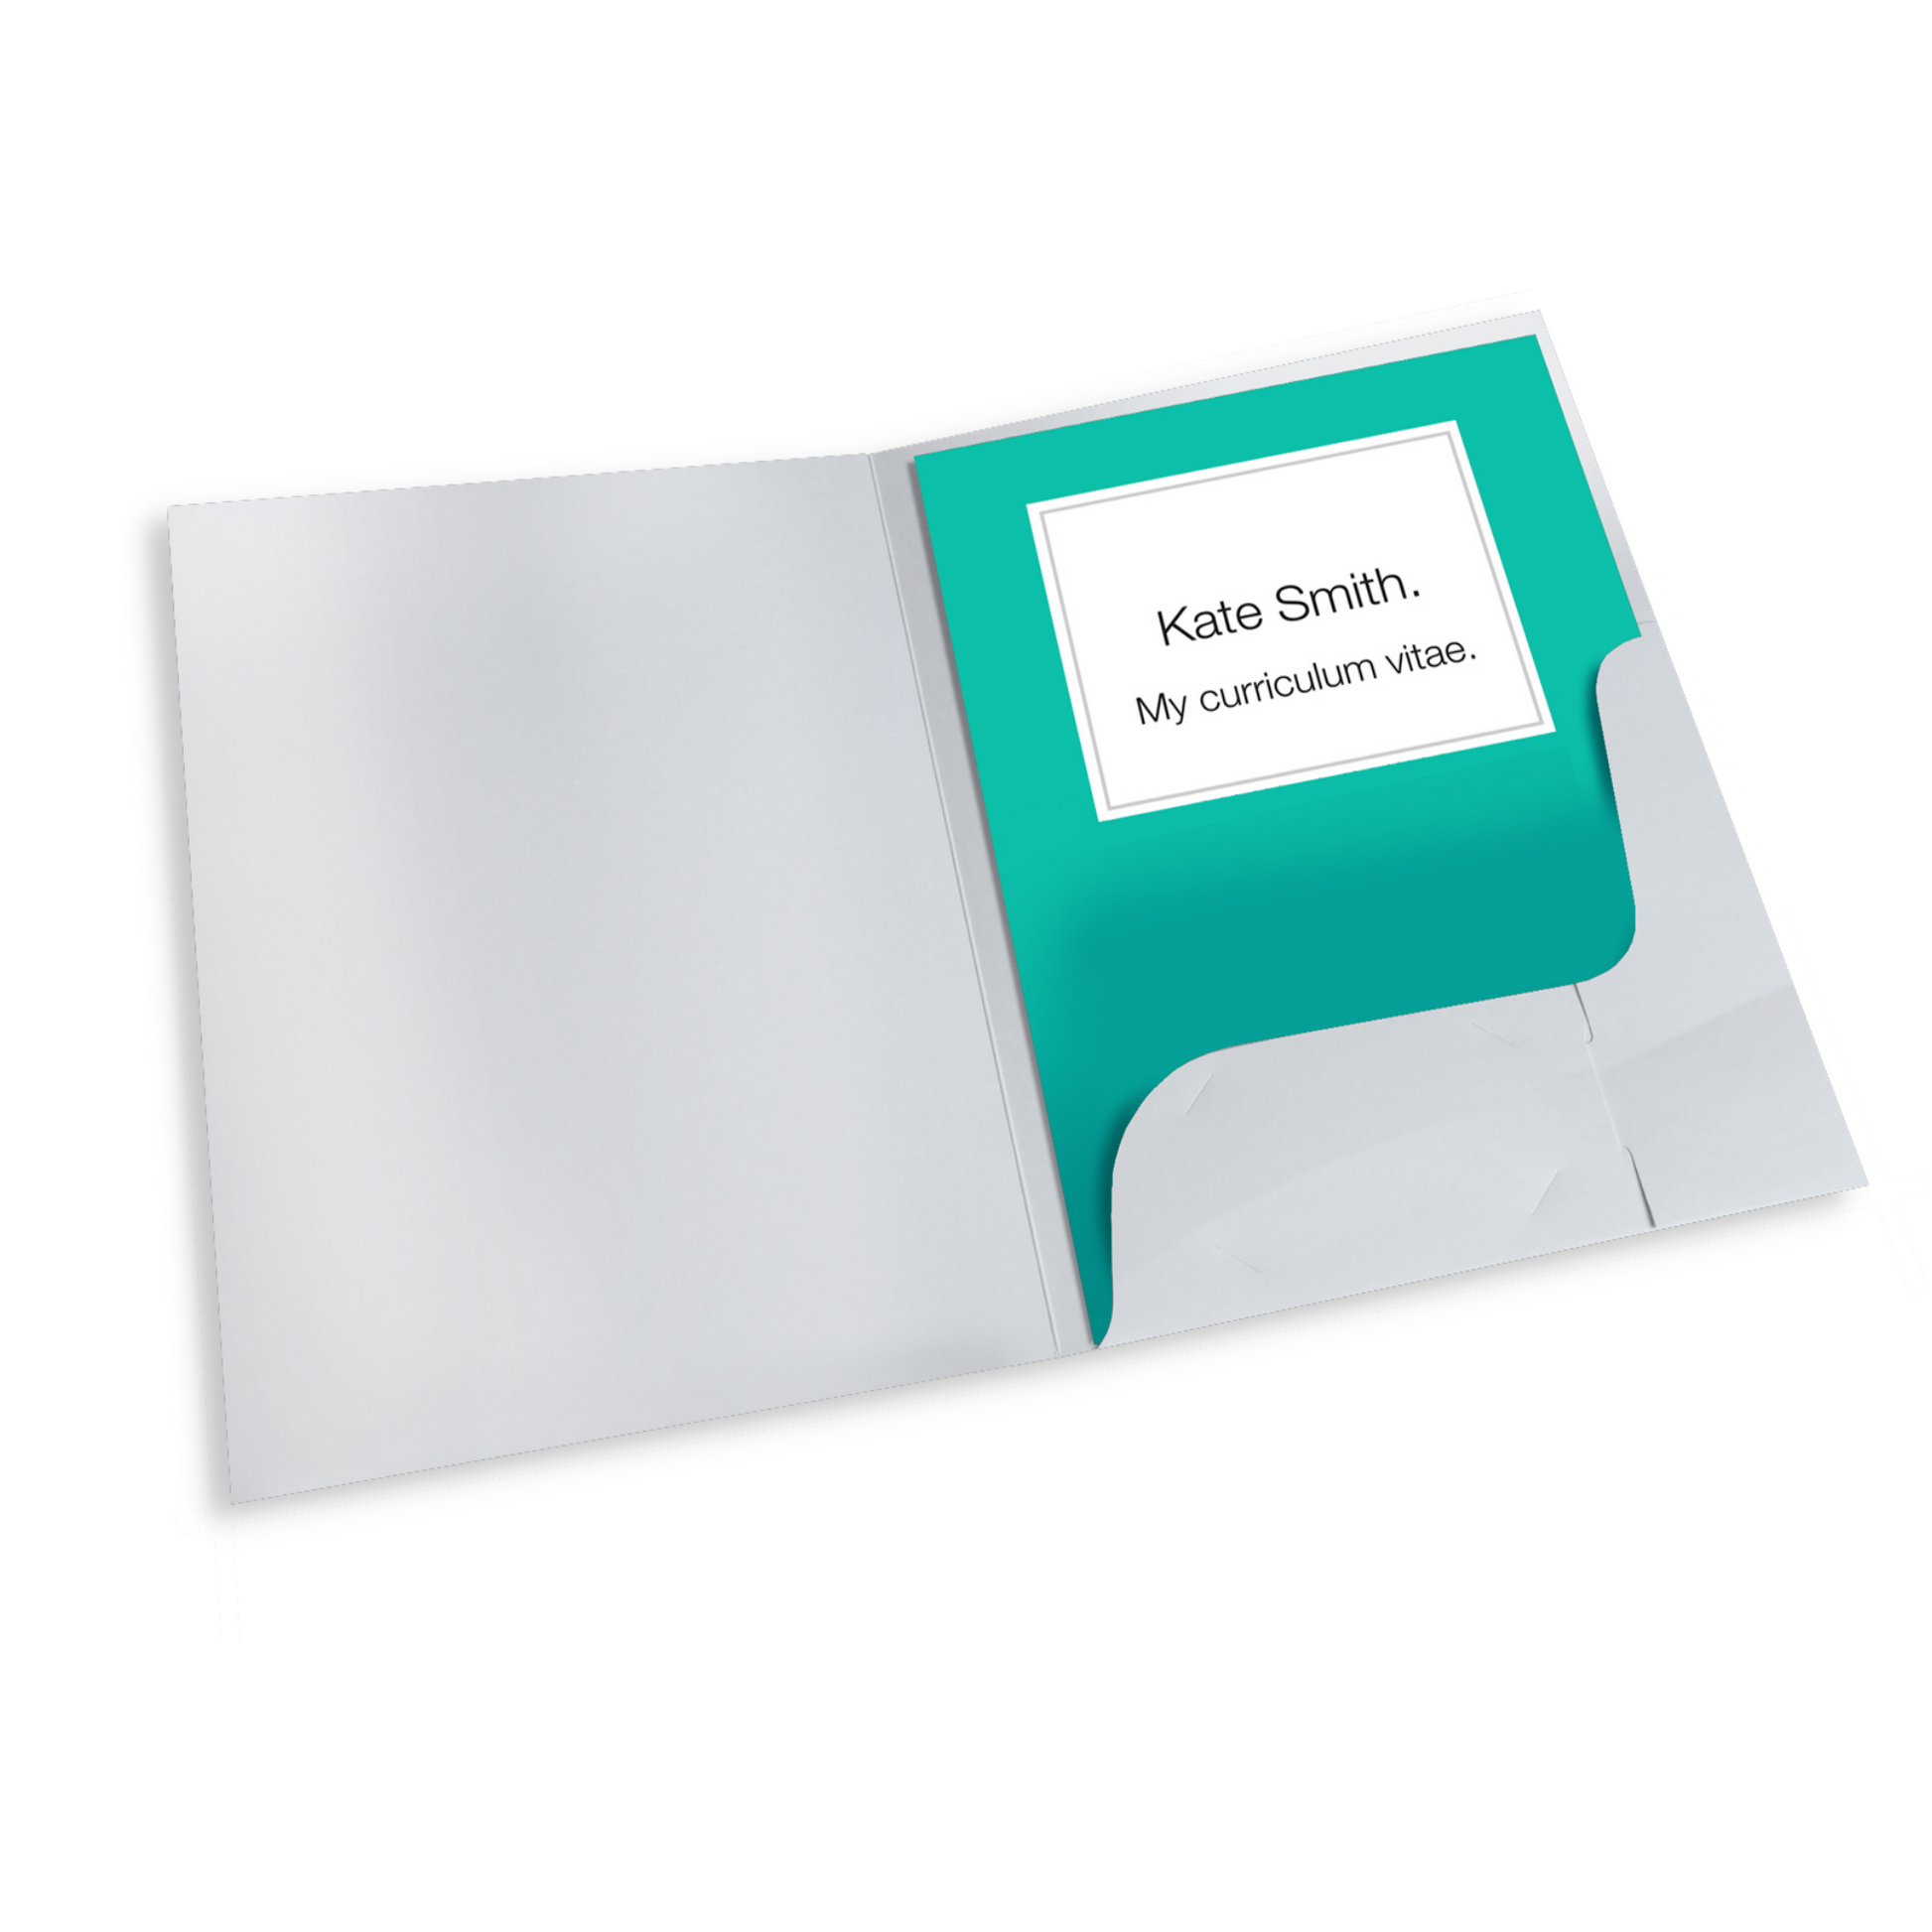 An open gloss white 250gsm card presentation folder containing a turquoise interior document with 'Kate Smith. My curriculum vitae.' The presentation folder also features a  pocket to keep the document in place, and 2 slots to hold a single business card.